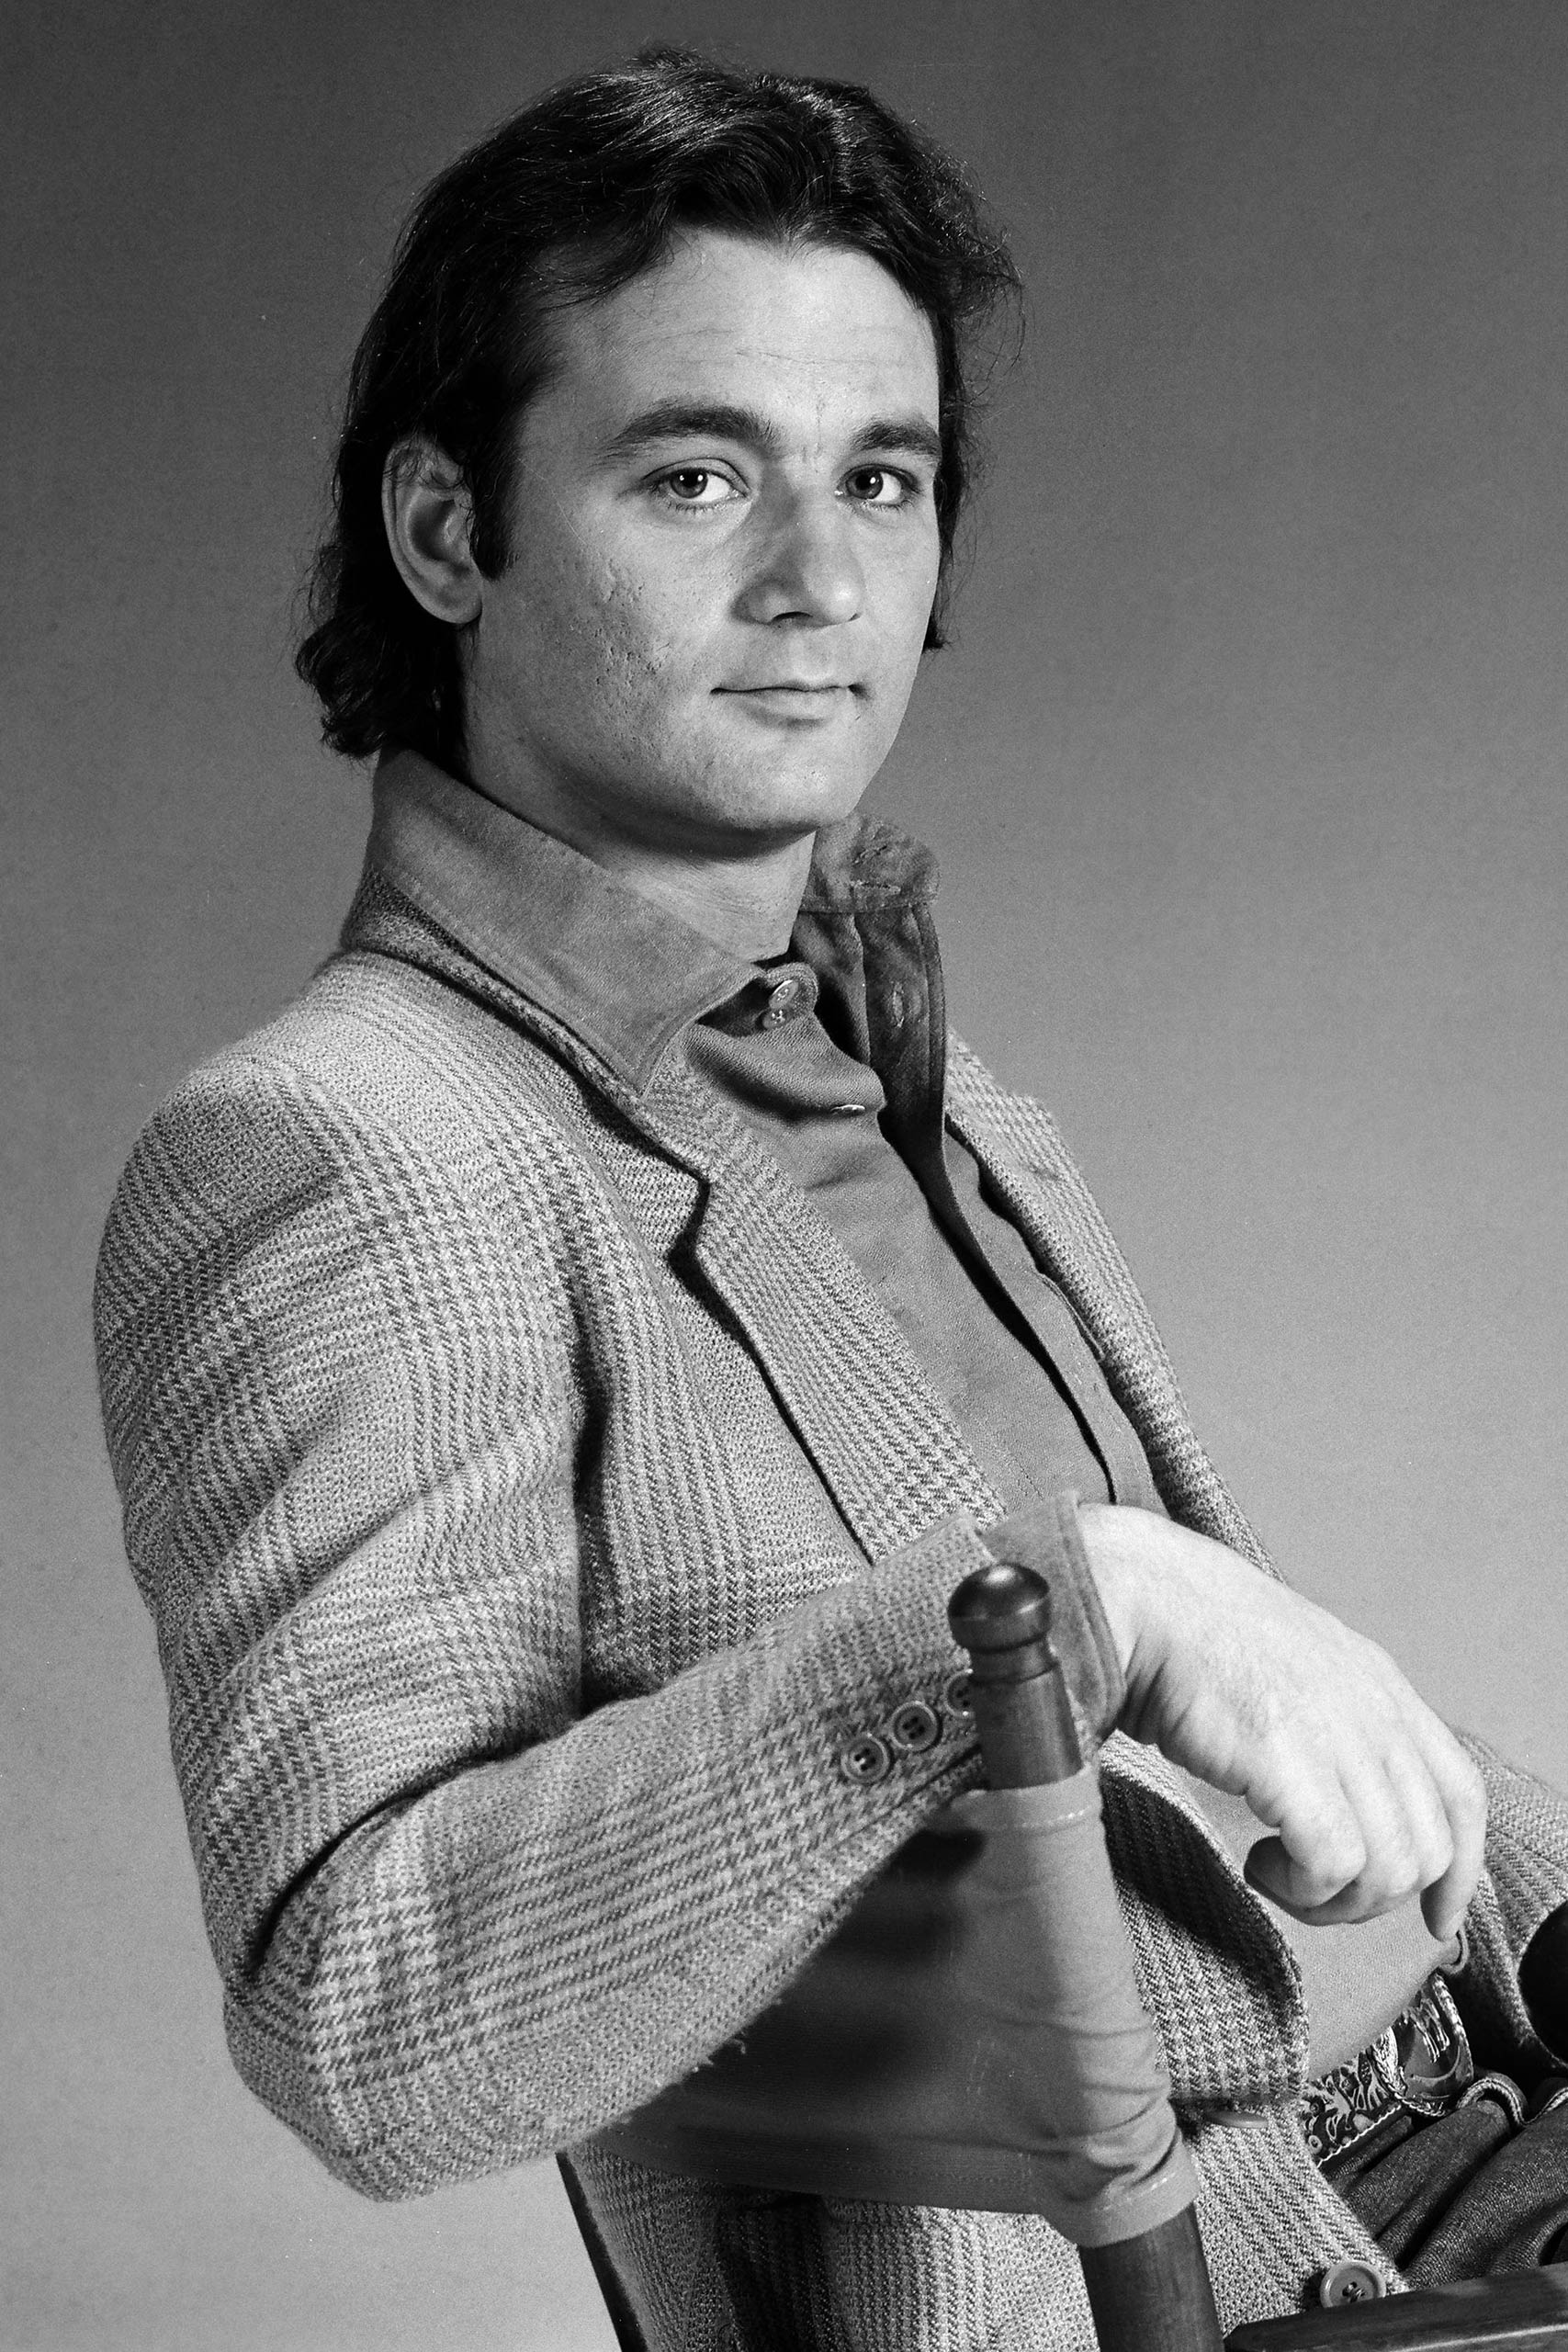 Bill Murray The party crashing ghostbuster got his start on television as a cast member on the short-lived ABC variety show Saturday Night Live with Howard Cosell in 1975, before joining NBC’s Saturday Night Live in 1977.